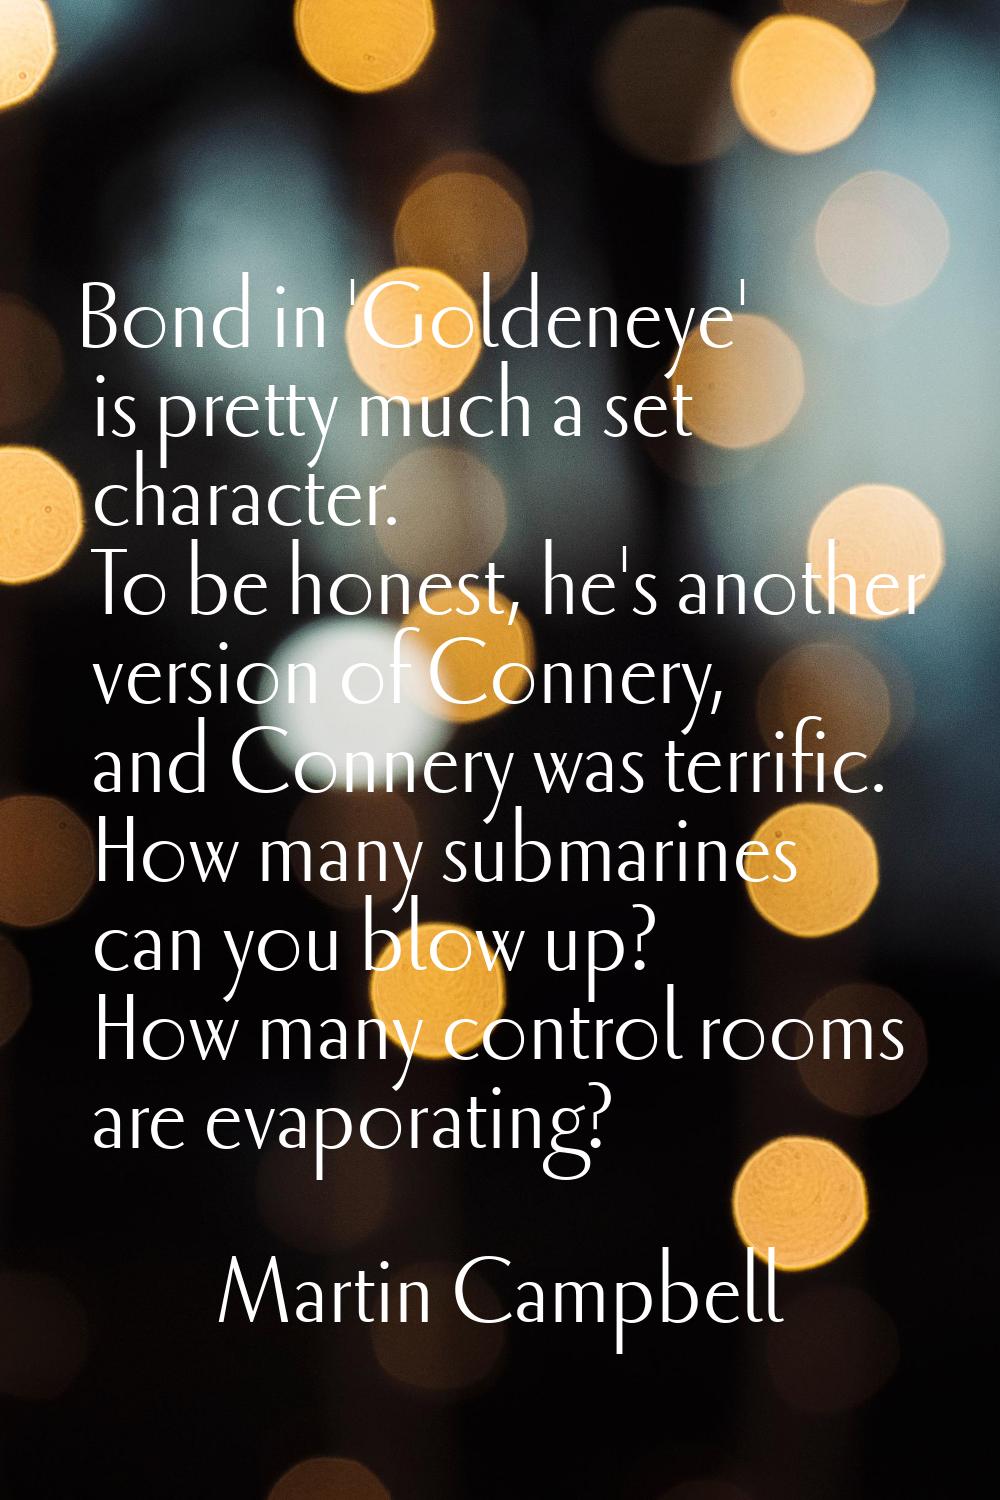 Bond in 'Goldeneye' is pretty much a set character. To be honest, he's another version of Connery, 